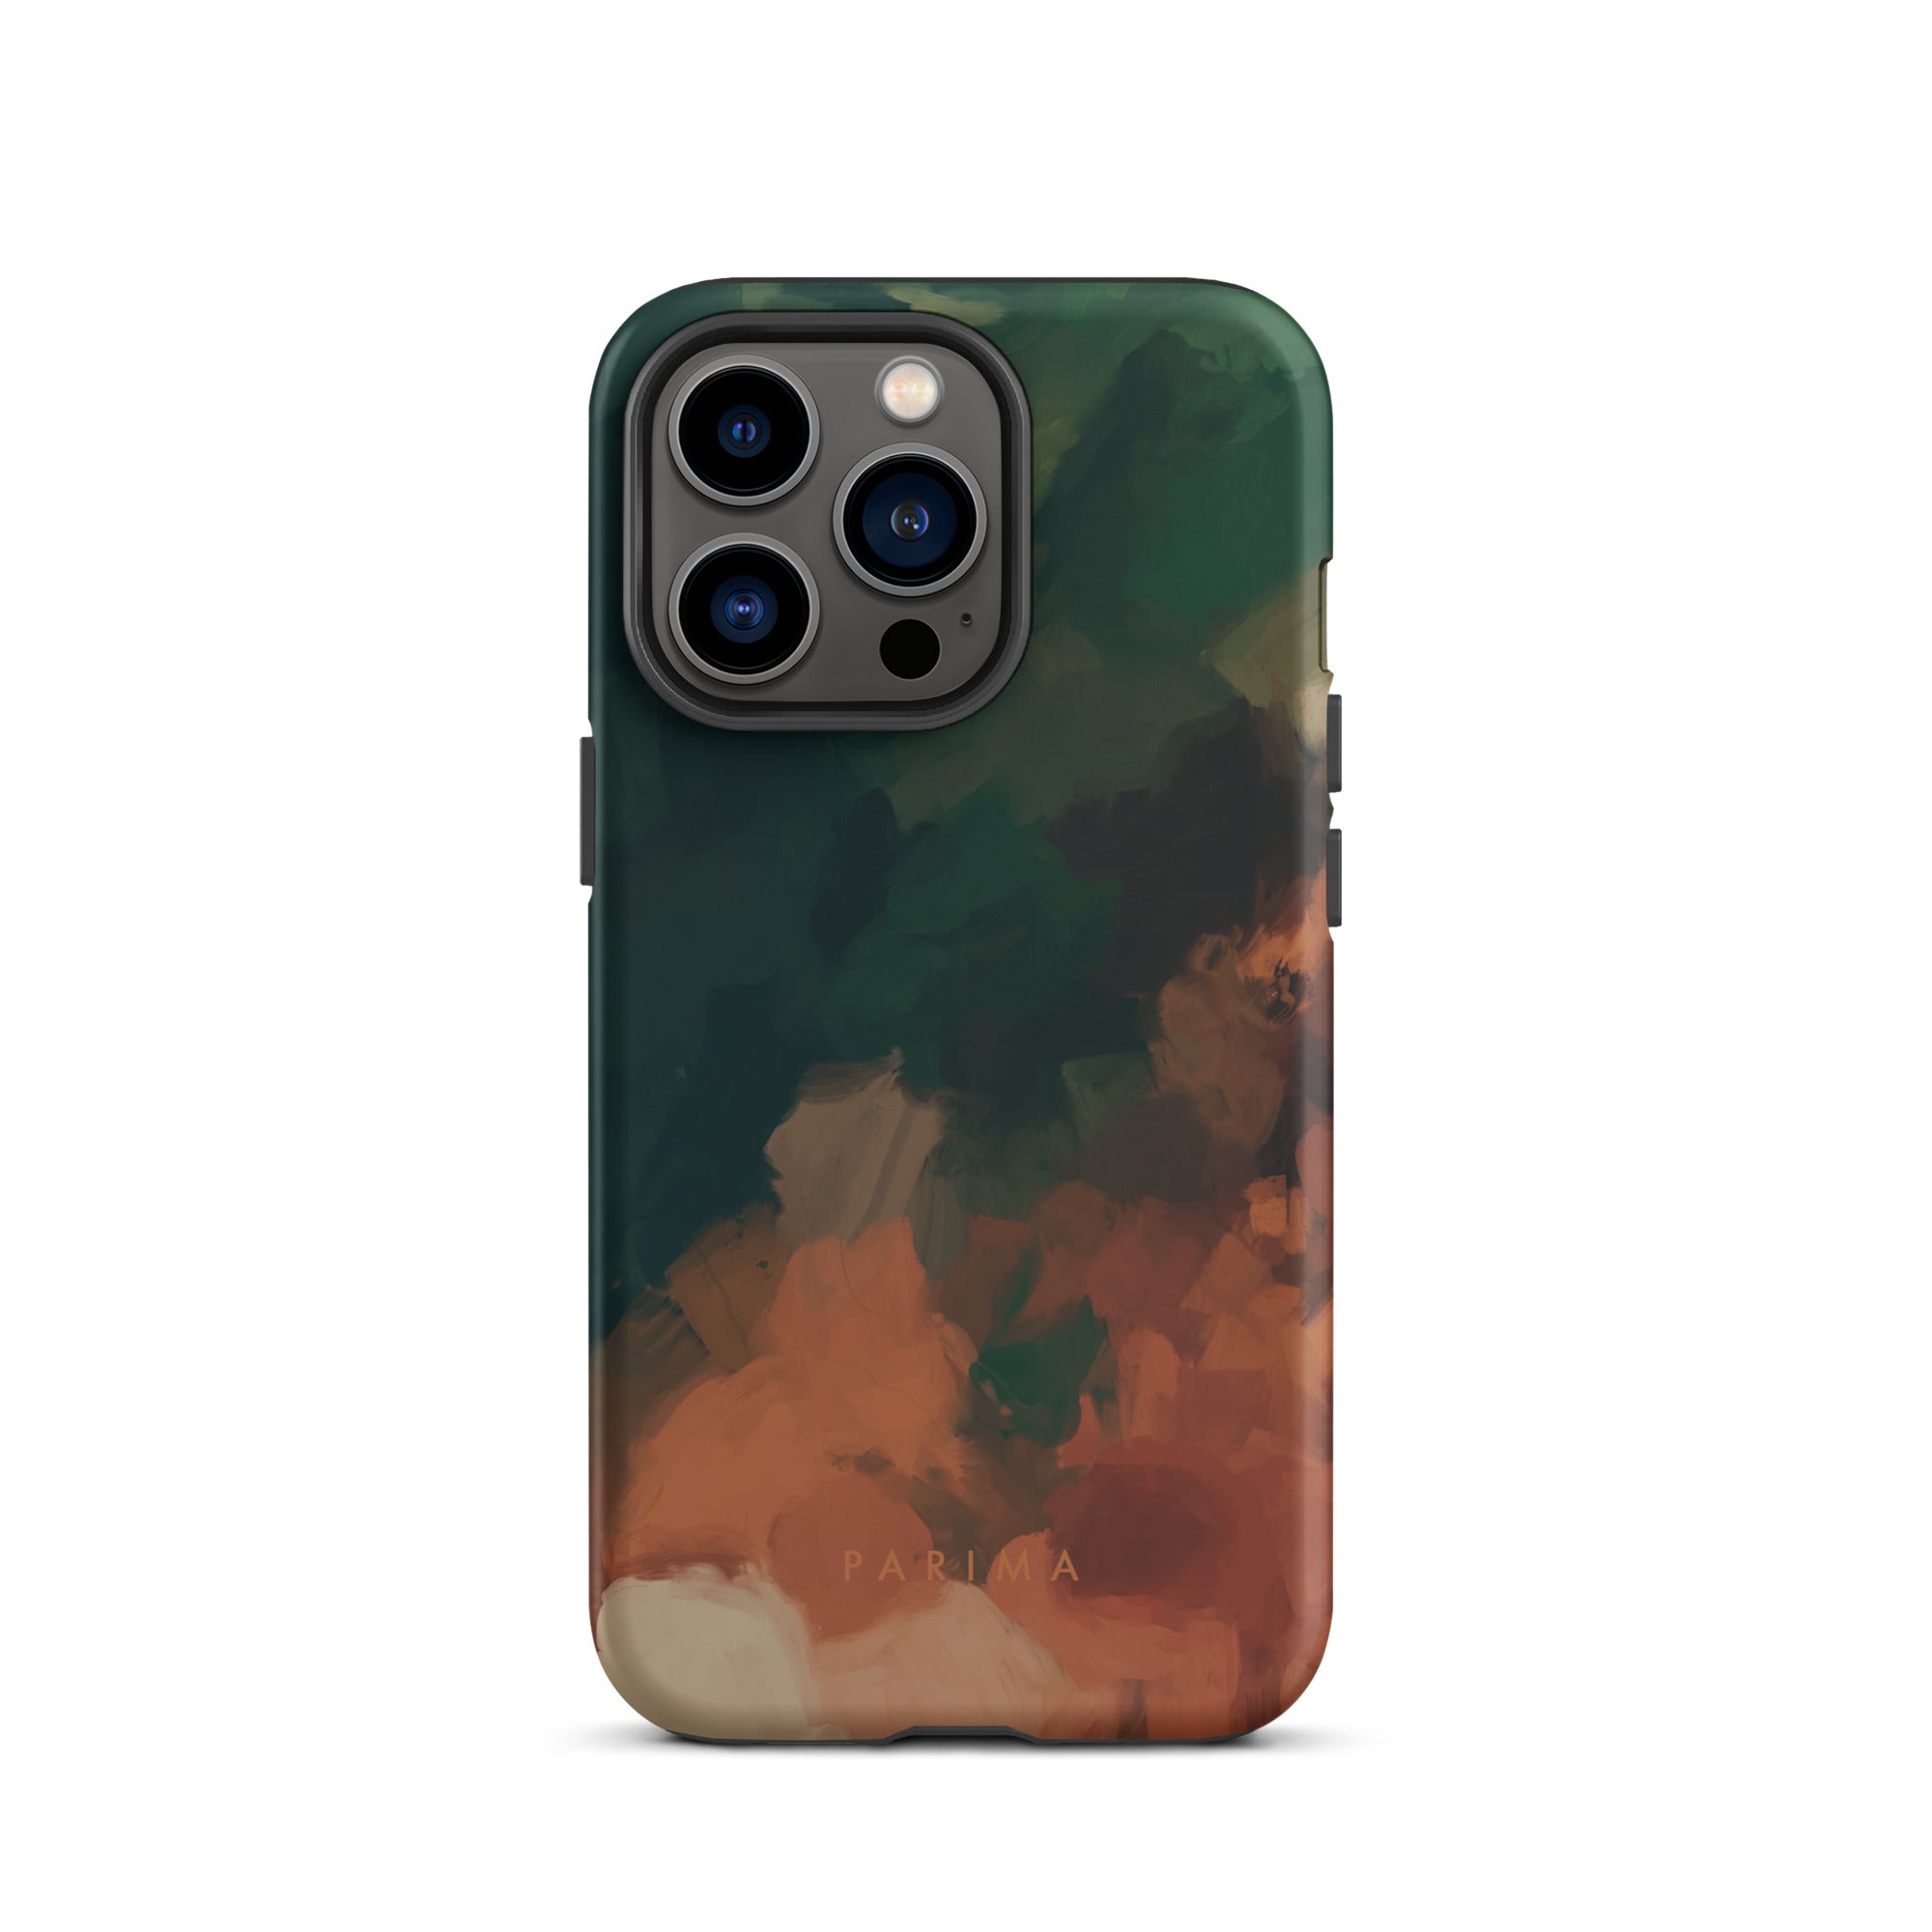 Cedar, green and brown abstract art - iPhone 13 Pro tough case by Parima Studio